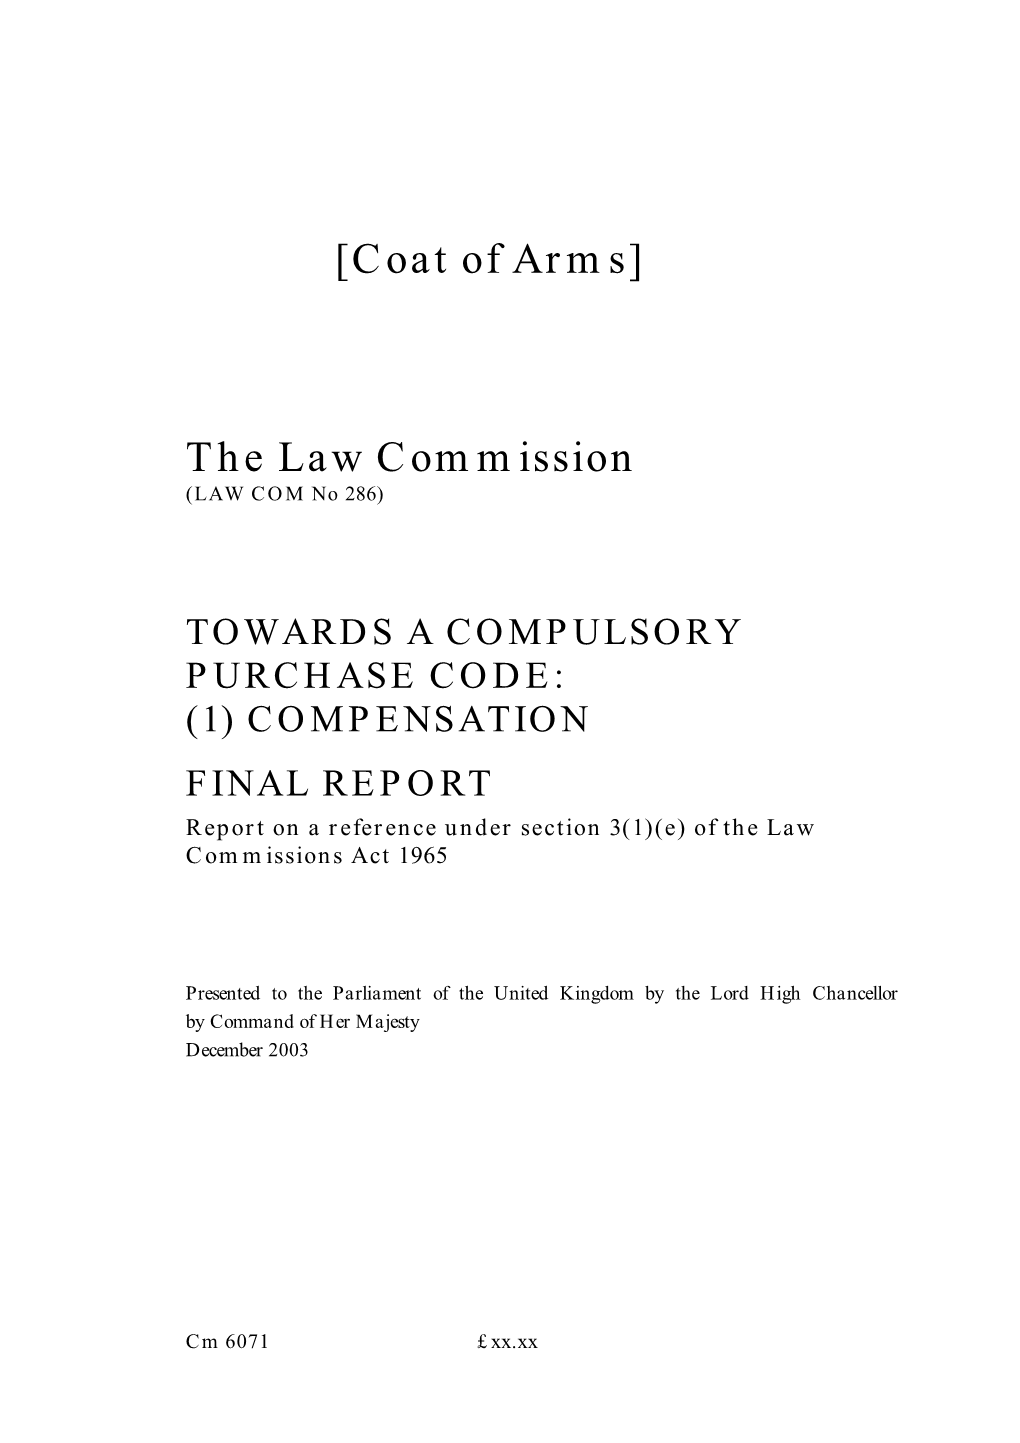 TOWARDS a COMPULSORY PURCHASE CODE: (1) COMPENSATION FINAL REPORT Report on a Reference Under Section 3(1)(E) of the Law Commissions Act 1965